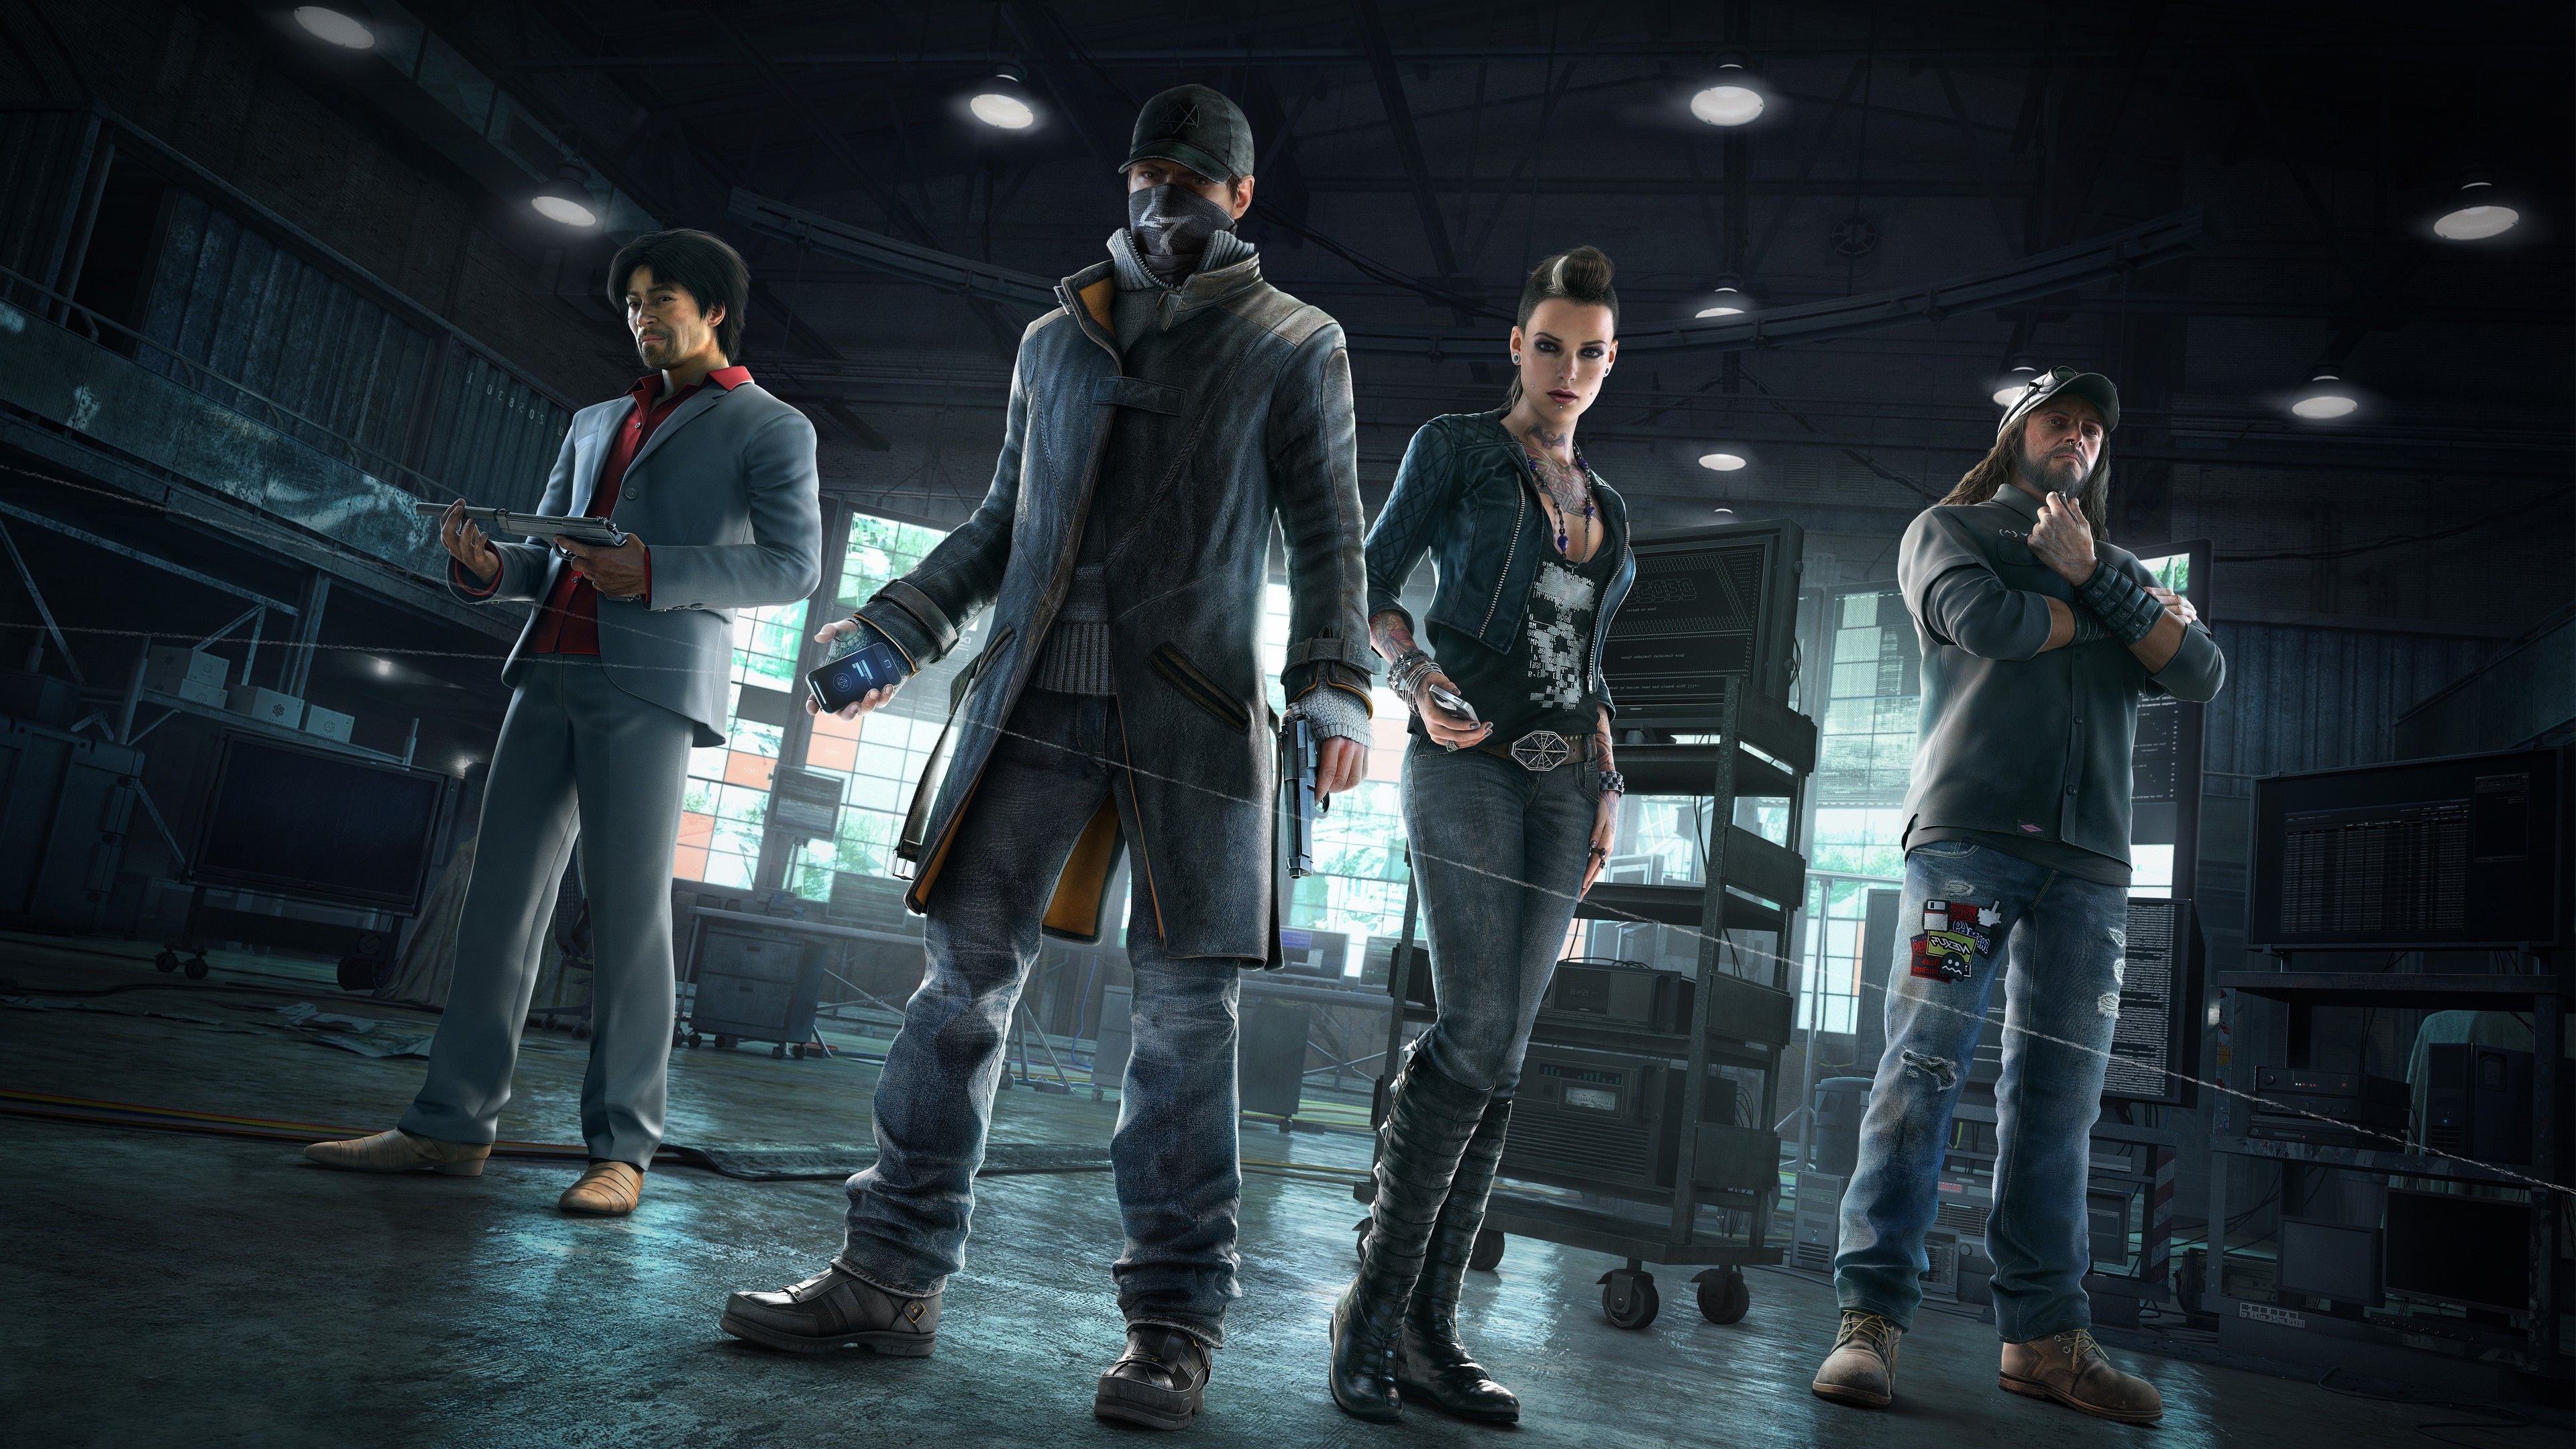 Watch Dogs 2 Video Game Wallpaper 62012 3840x2160 px